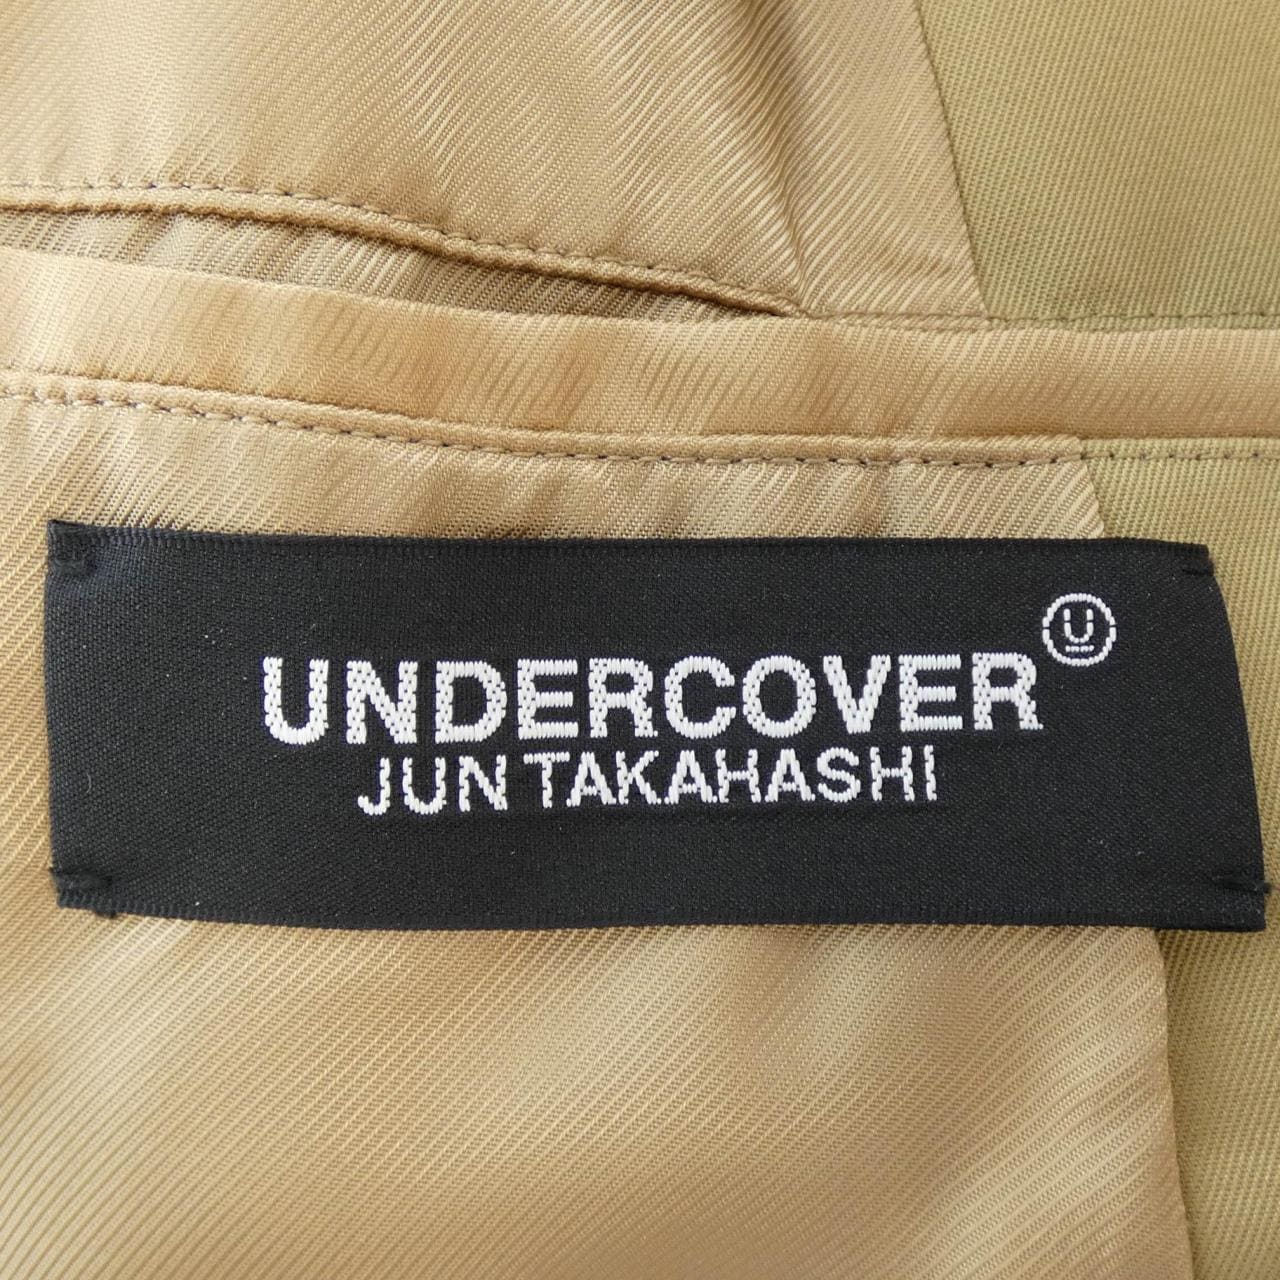 UNDER COVER trench coat